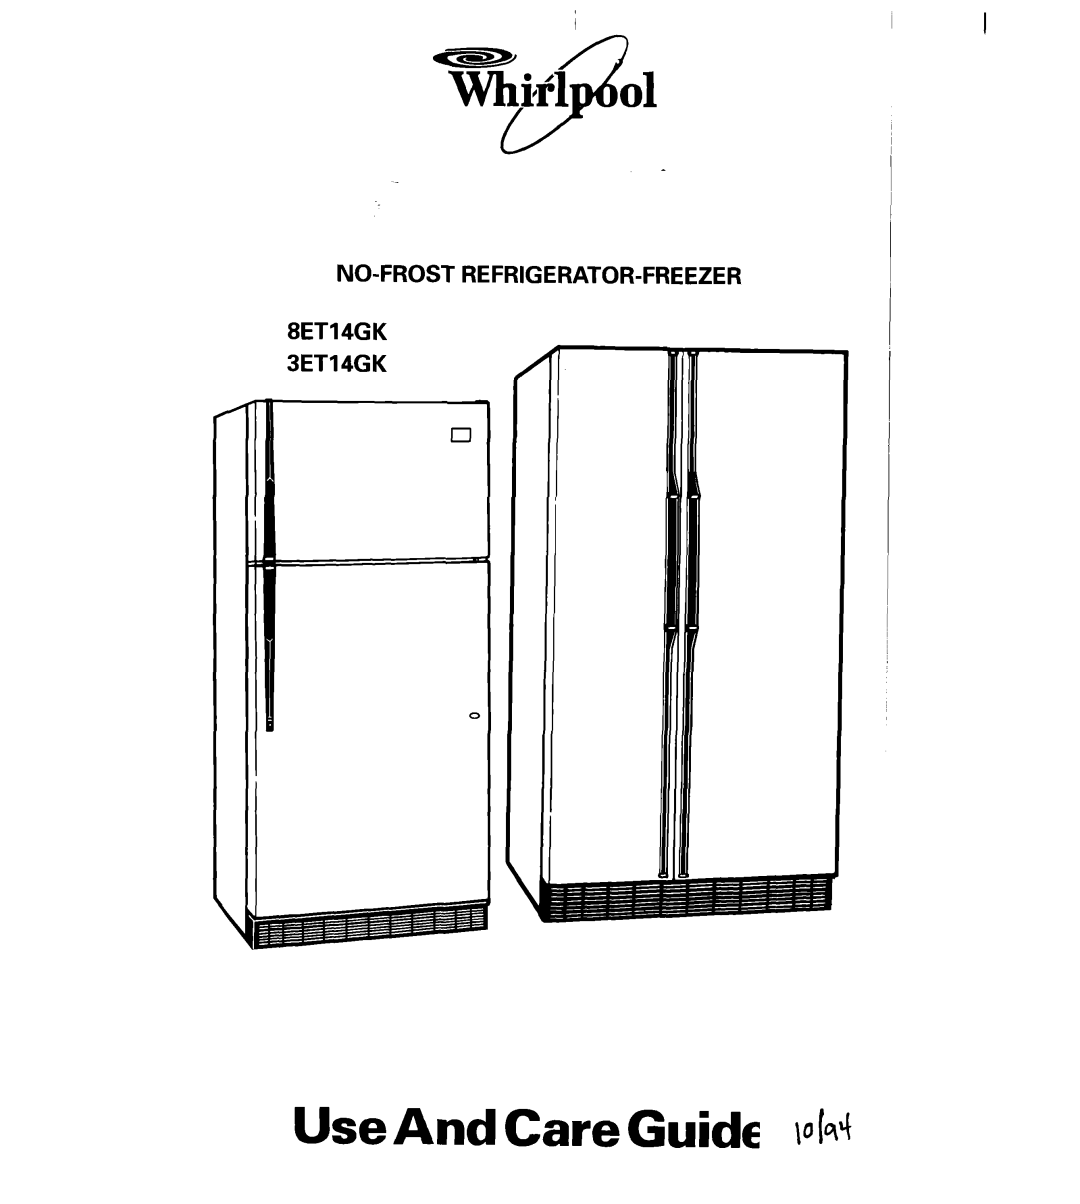 Whirlpool manual Use And Care Guide PM, NO-FROST REFRIGERATOR-FREEZER 8ET14GK 3ET14GK 